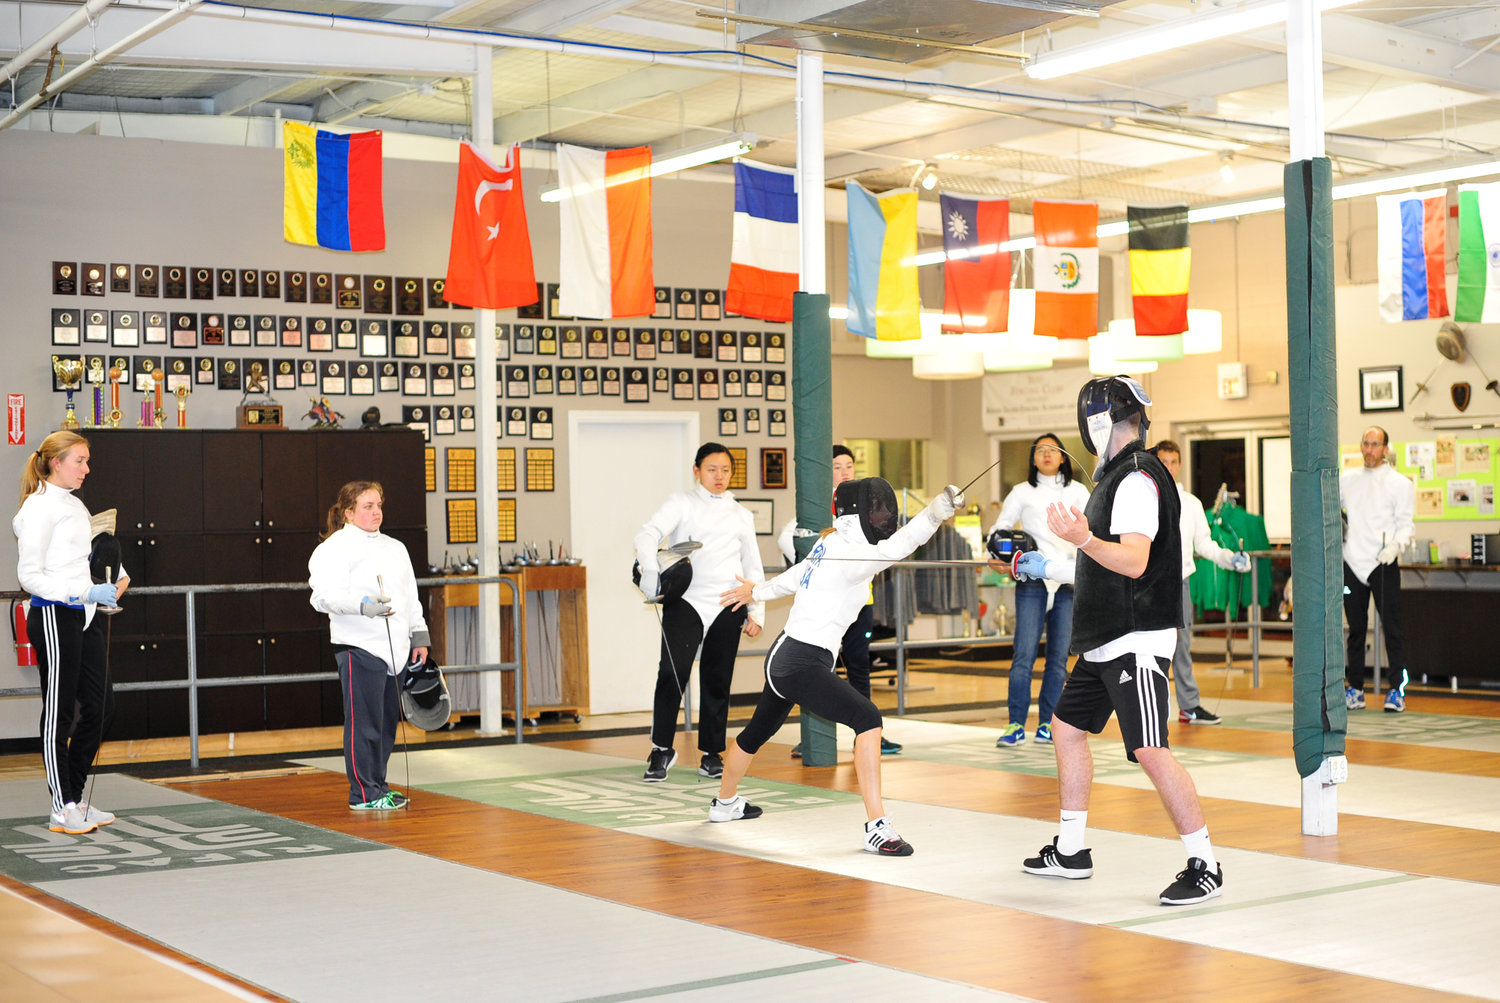 Fencers sparring during a pre-COVID lesson; RIFAC currently welcomes students with all precautions in place